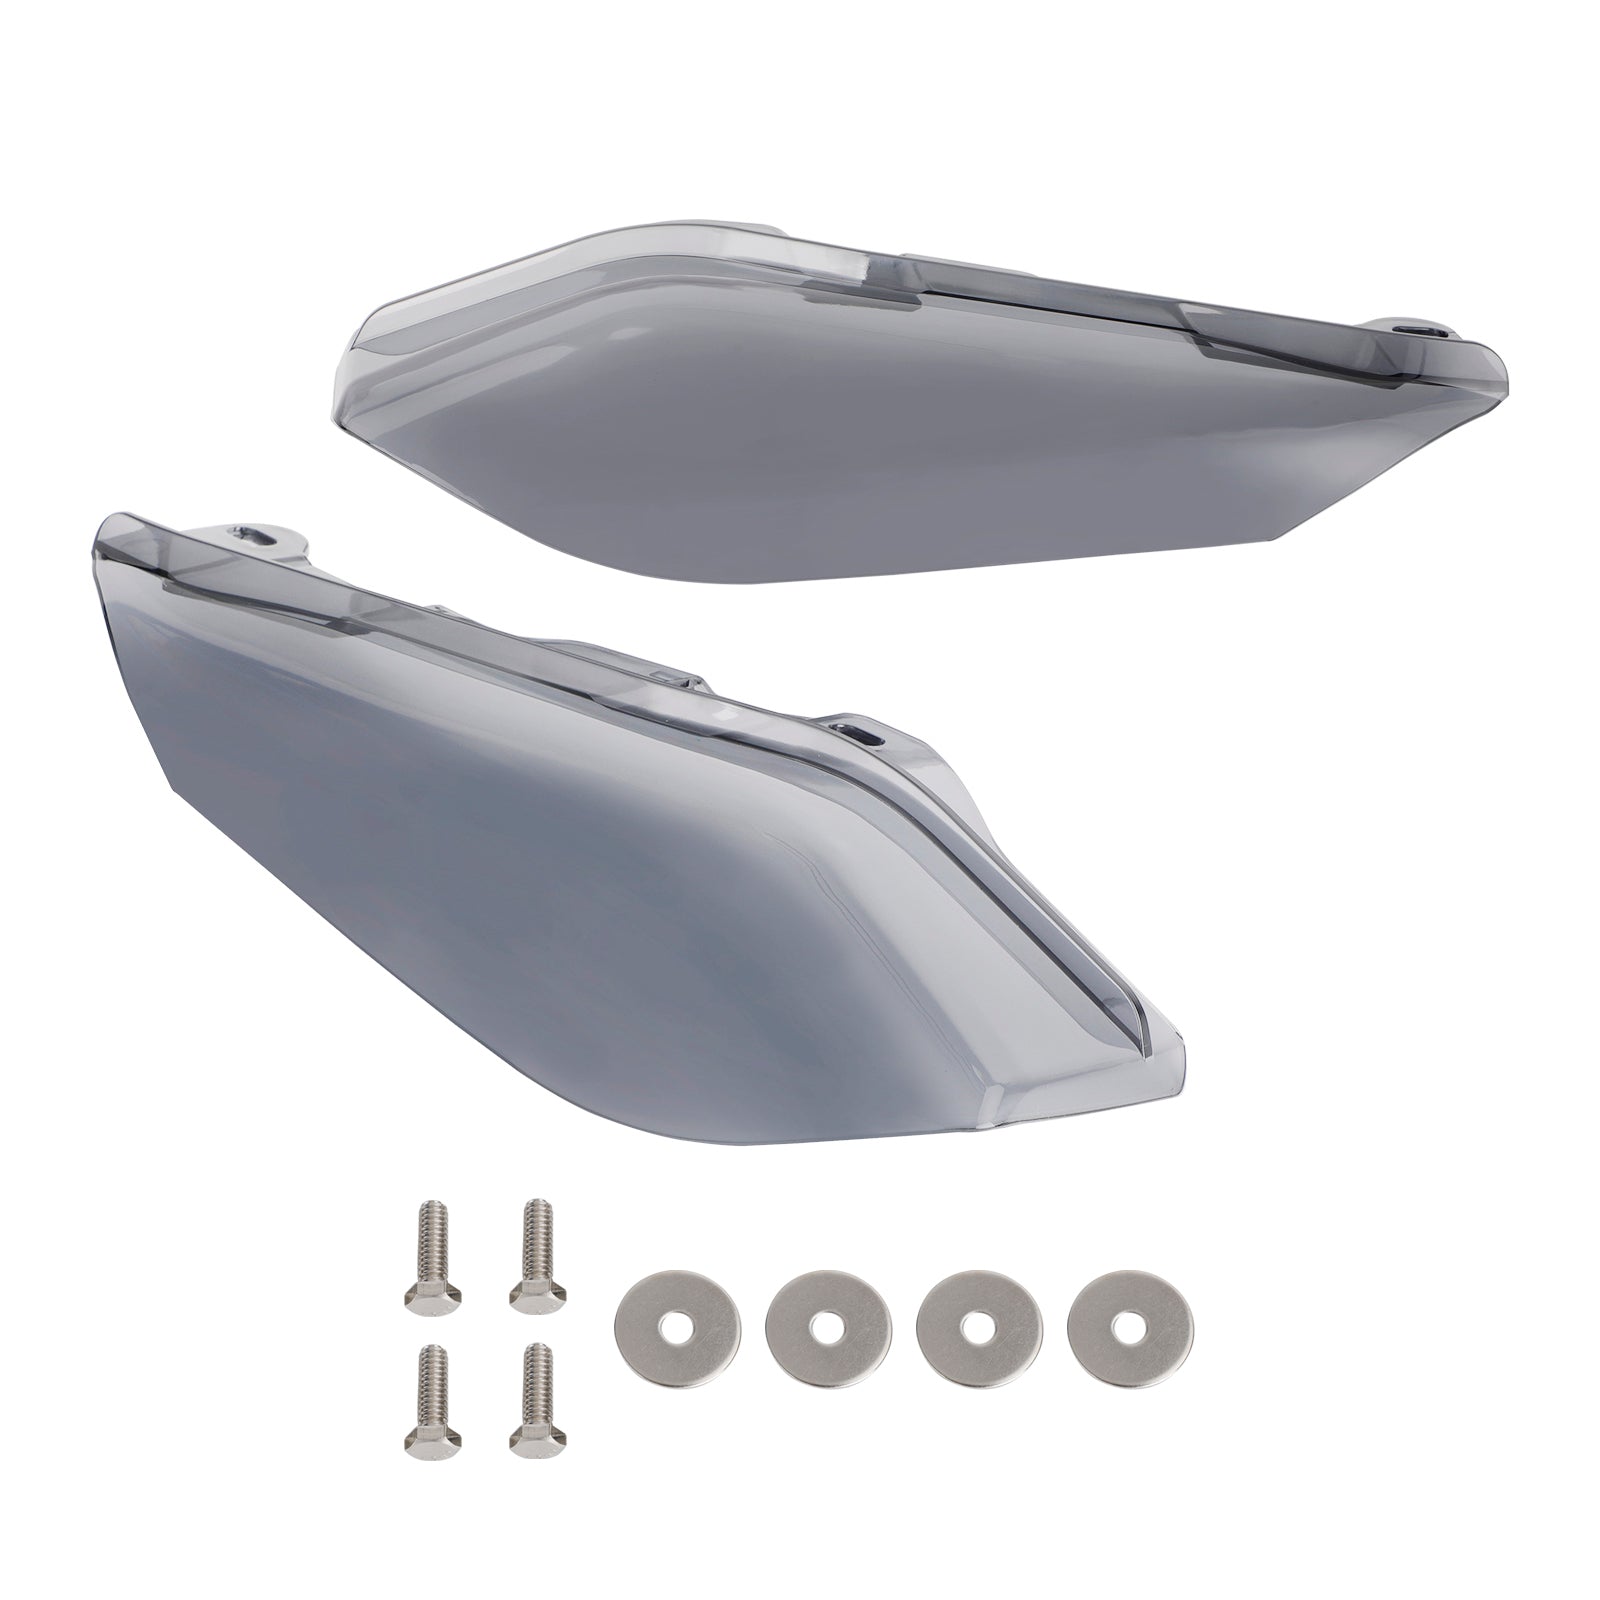 Mid-Frame Air Heat Deflector Trim Shield fit for 09-16 Touring and Trike models